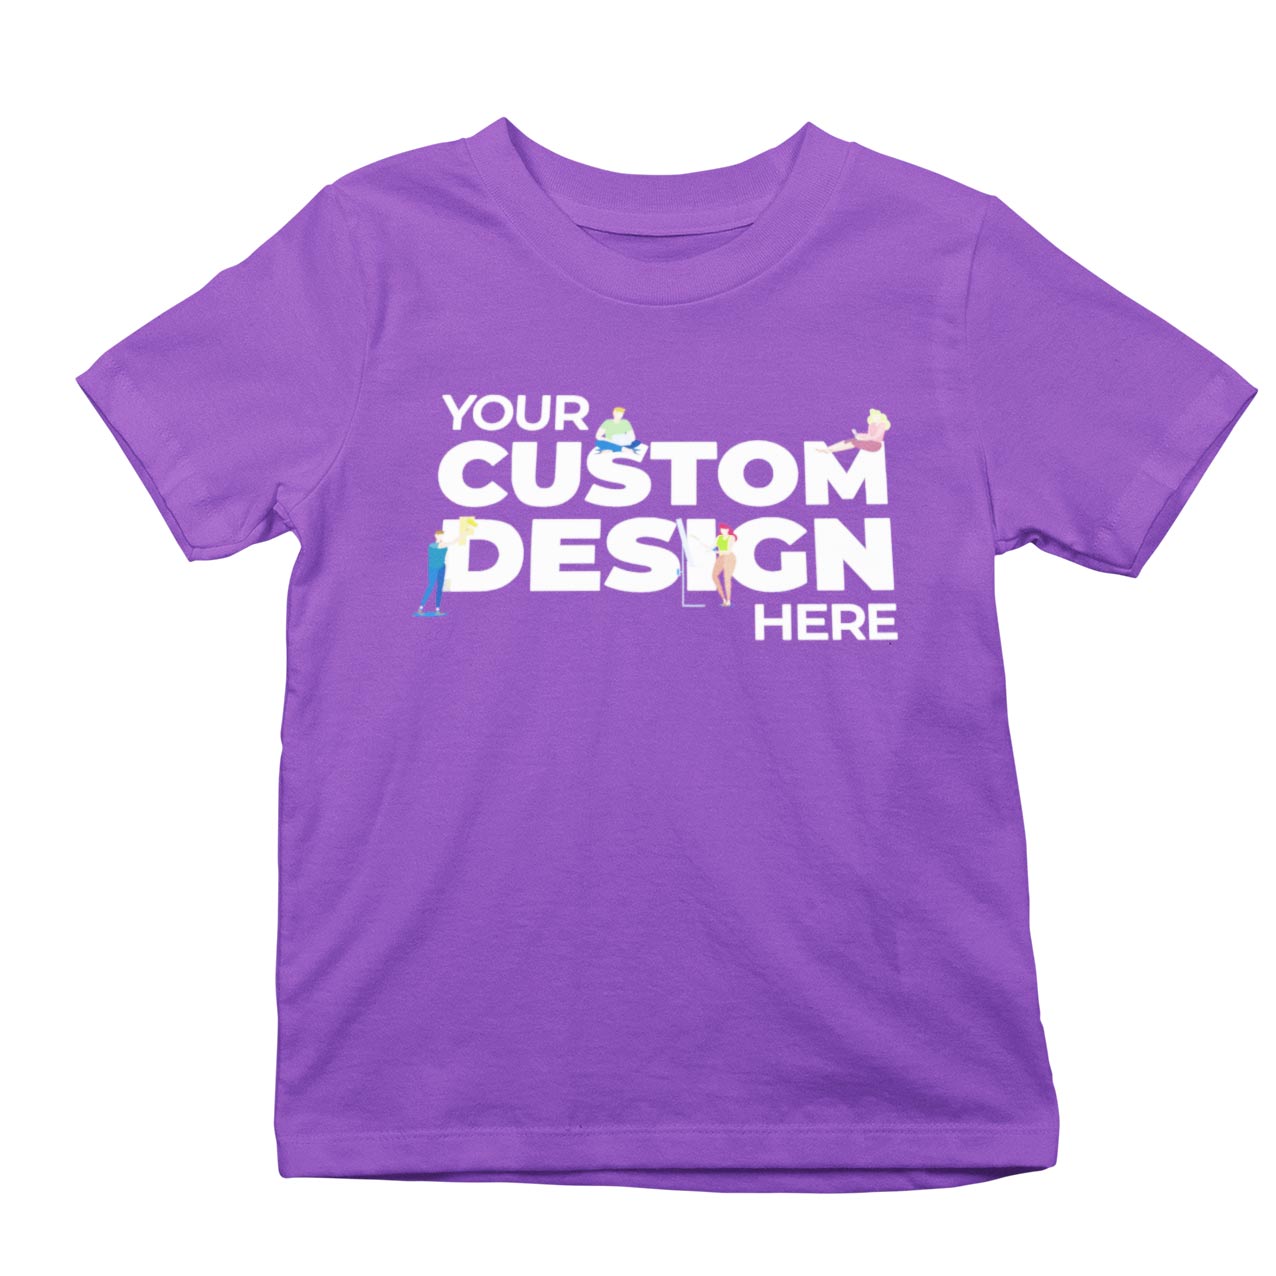 custom customisable t-shirt india red t-shirt red  tshirts black tshirt the banyan tee tbt basics buy custom customisable tshirts india kids boys girls for 12 year old 5 year old 10 13 new born